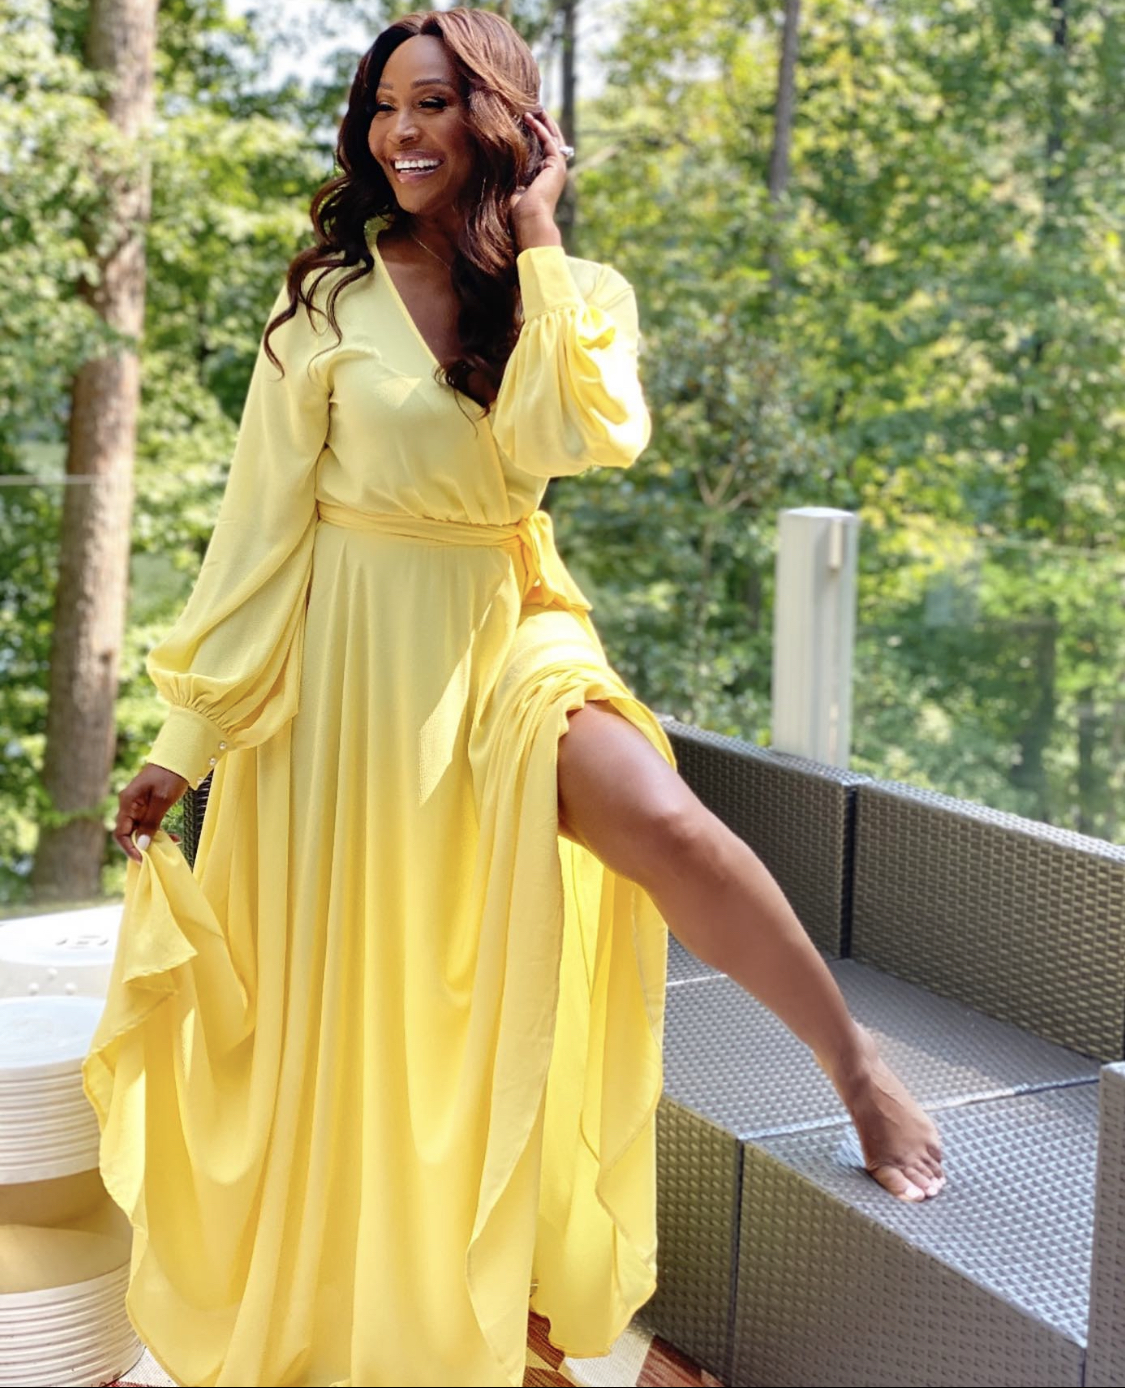 'Looking Like a Sun': Cynthia Bailey Stuns Fans with New Photo as She ...